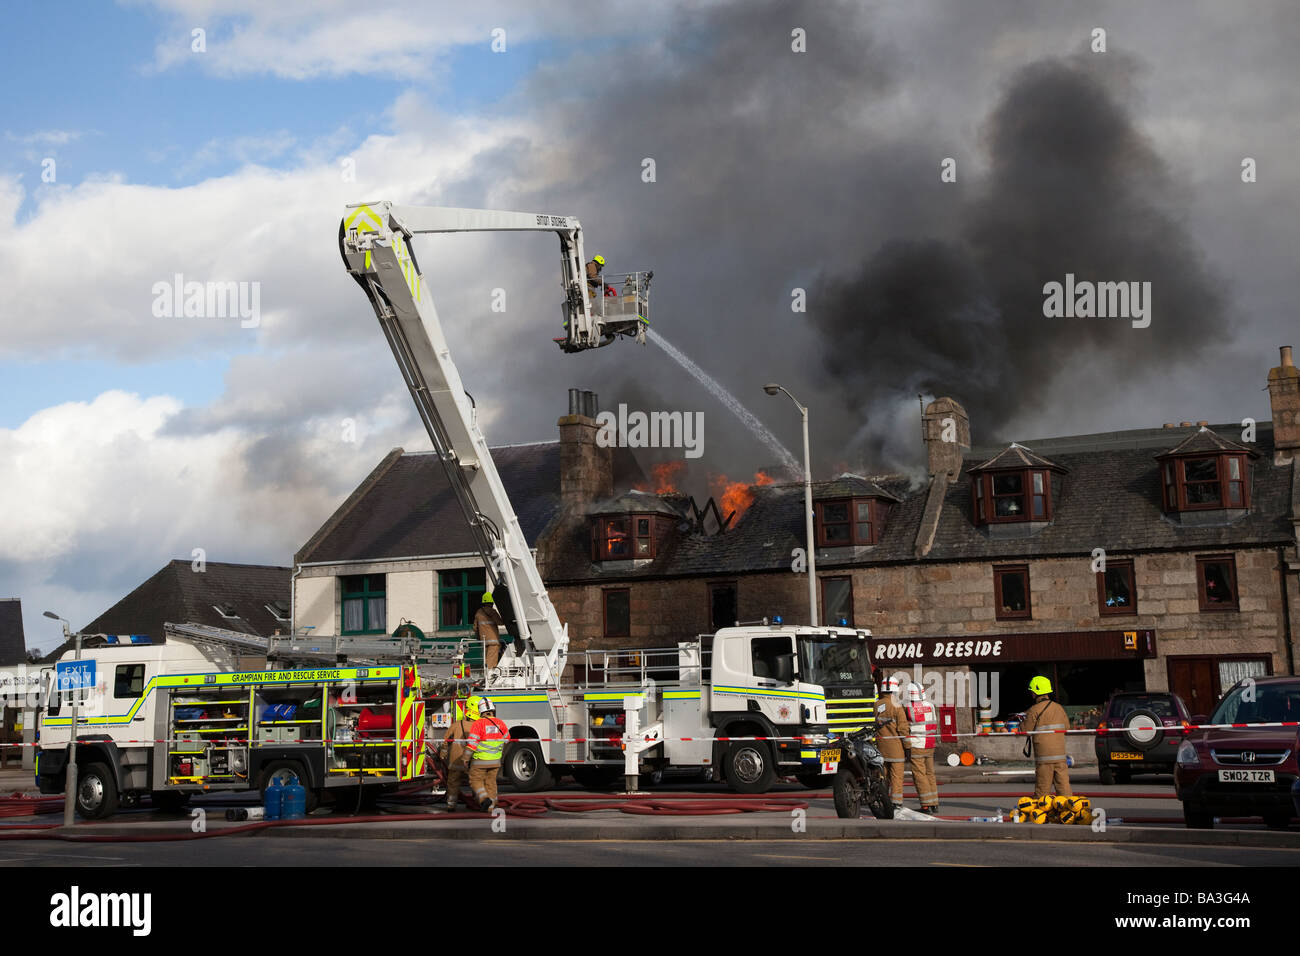 Firemen fighting Shop fire. Firefighter at scene at George Strachan’s of Aboyne, Aberdeenshire, Scotland Stock Photo